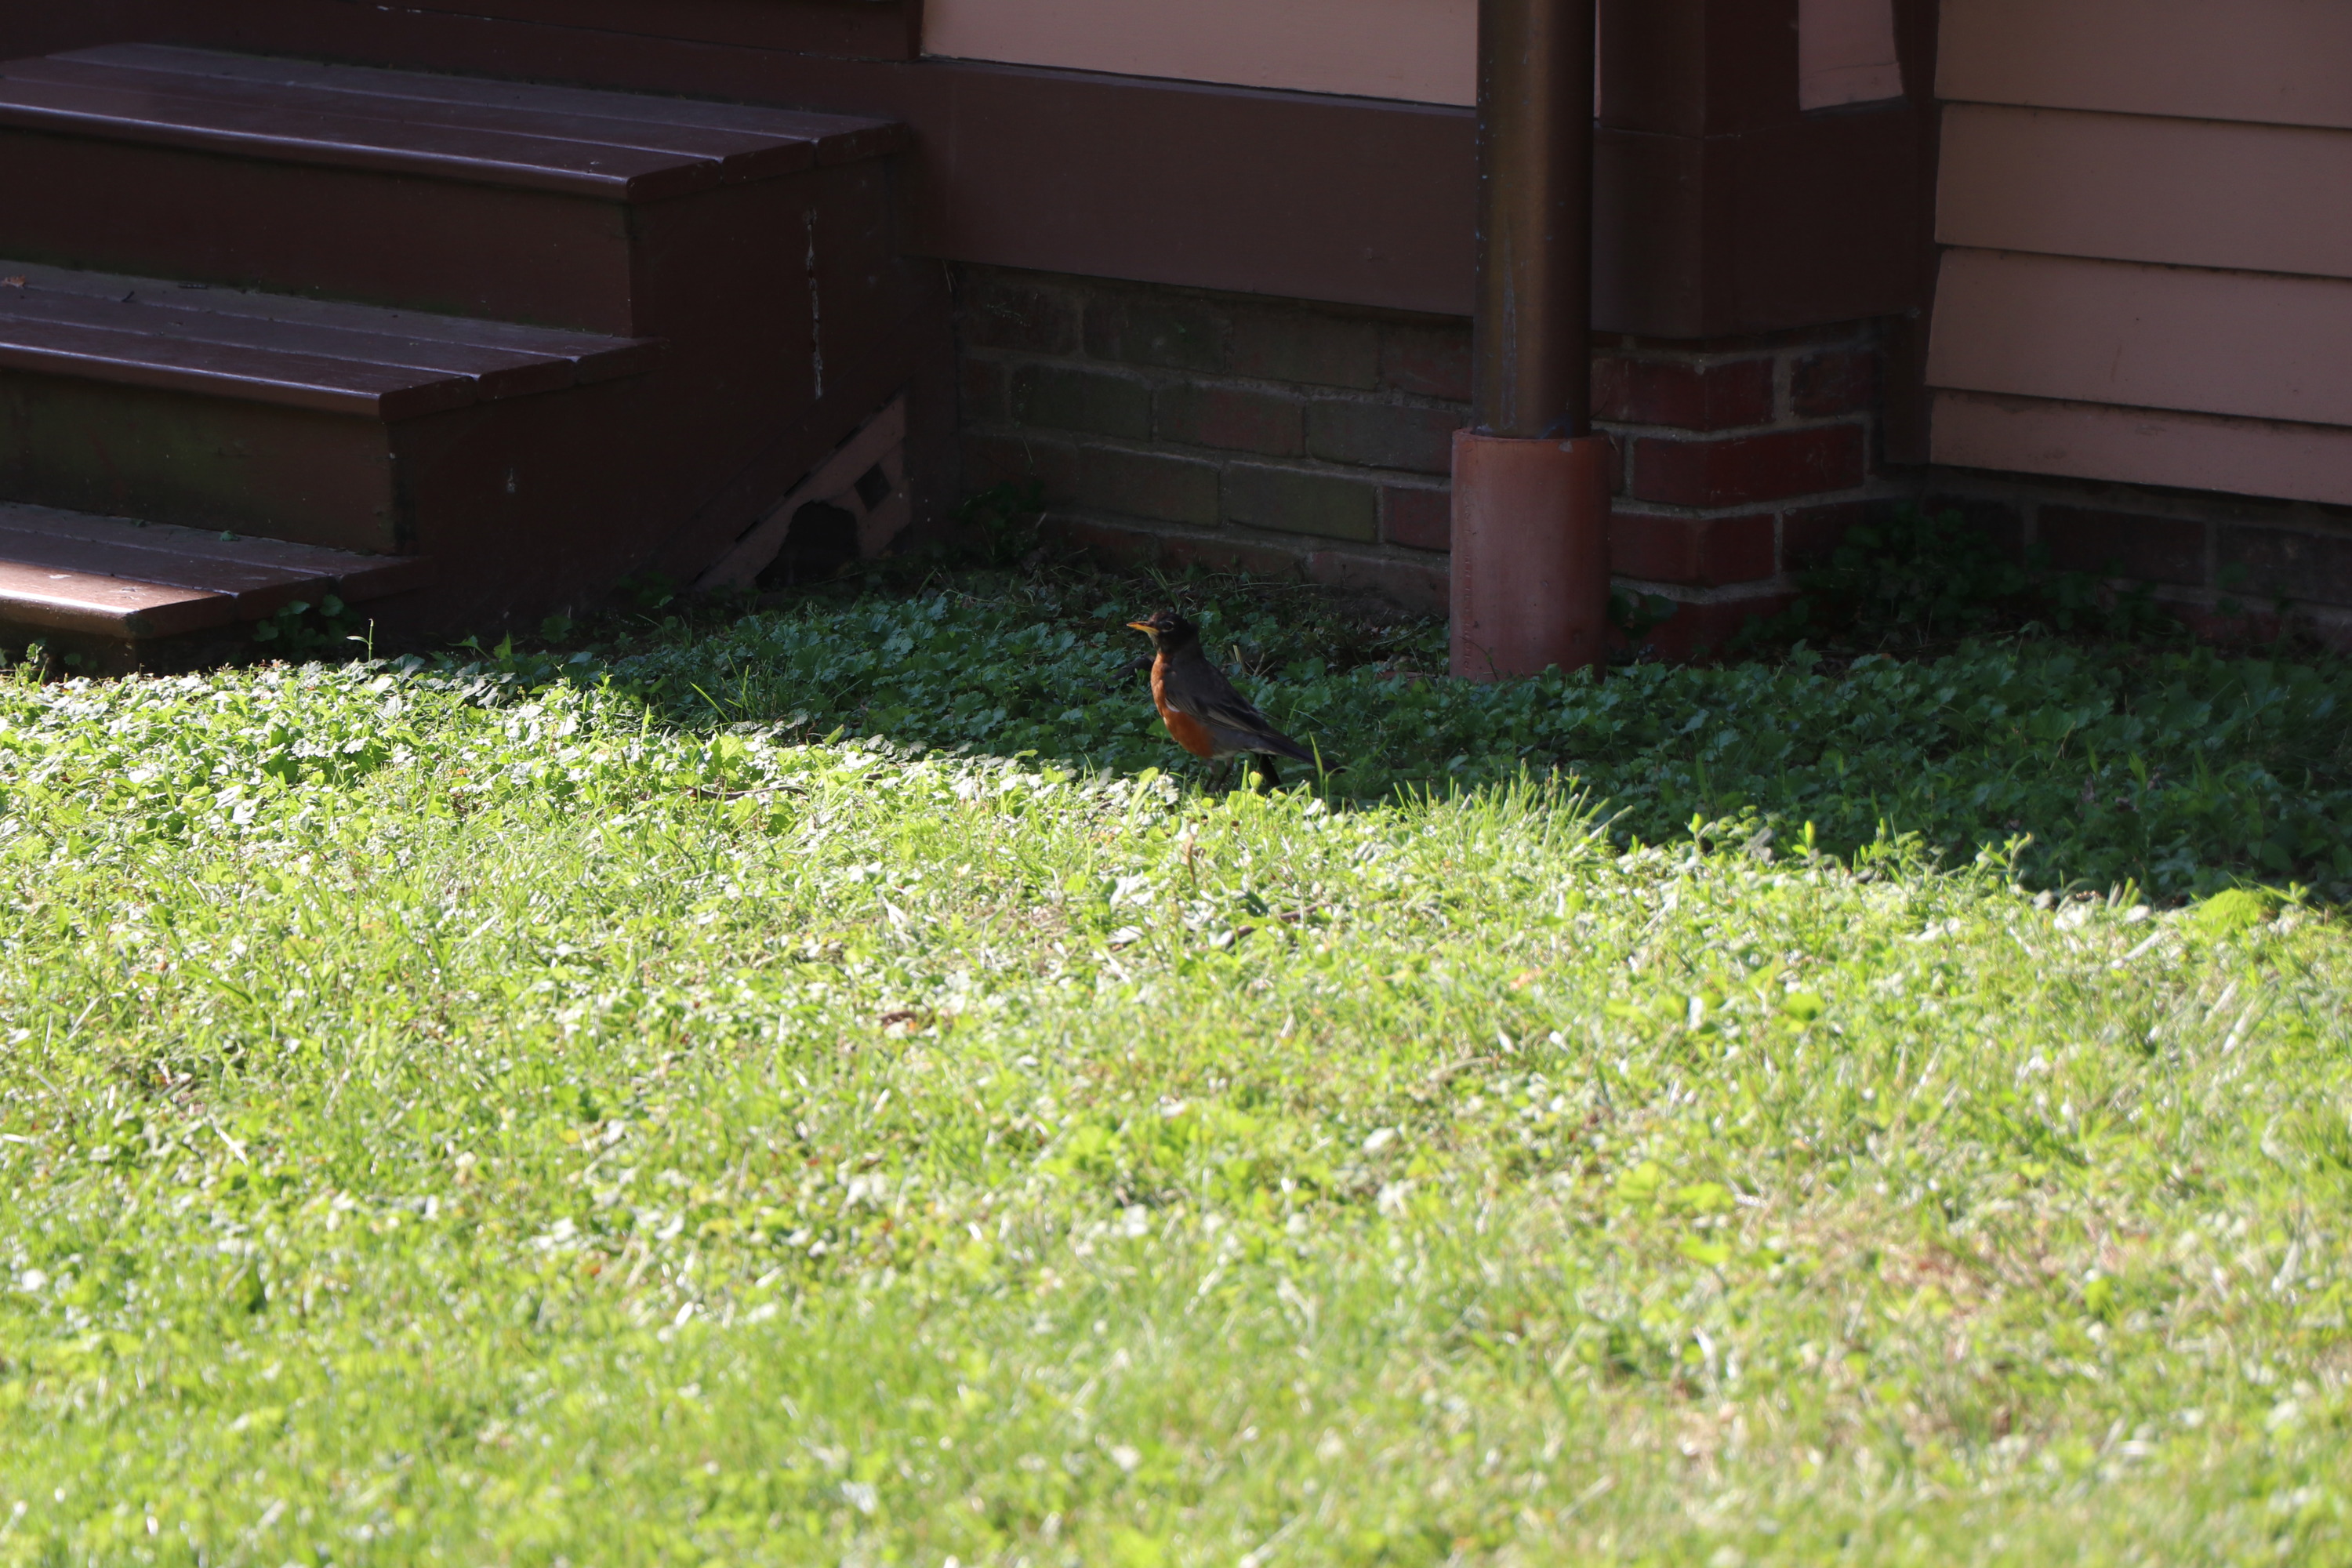 A small bird with a dark back and red front sitting in the grass.